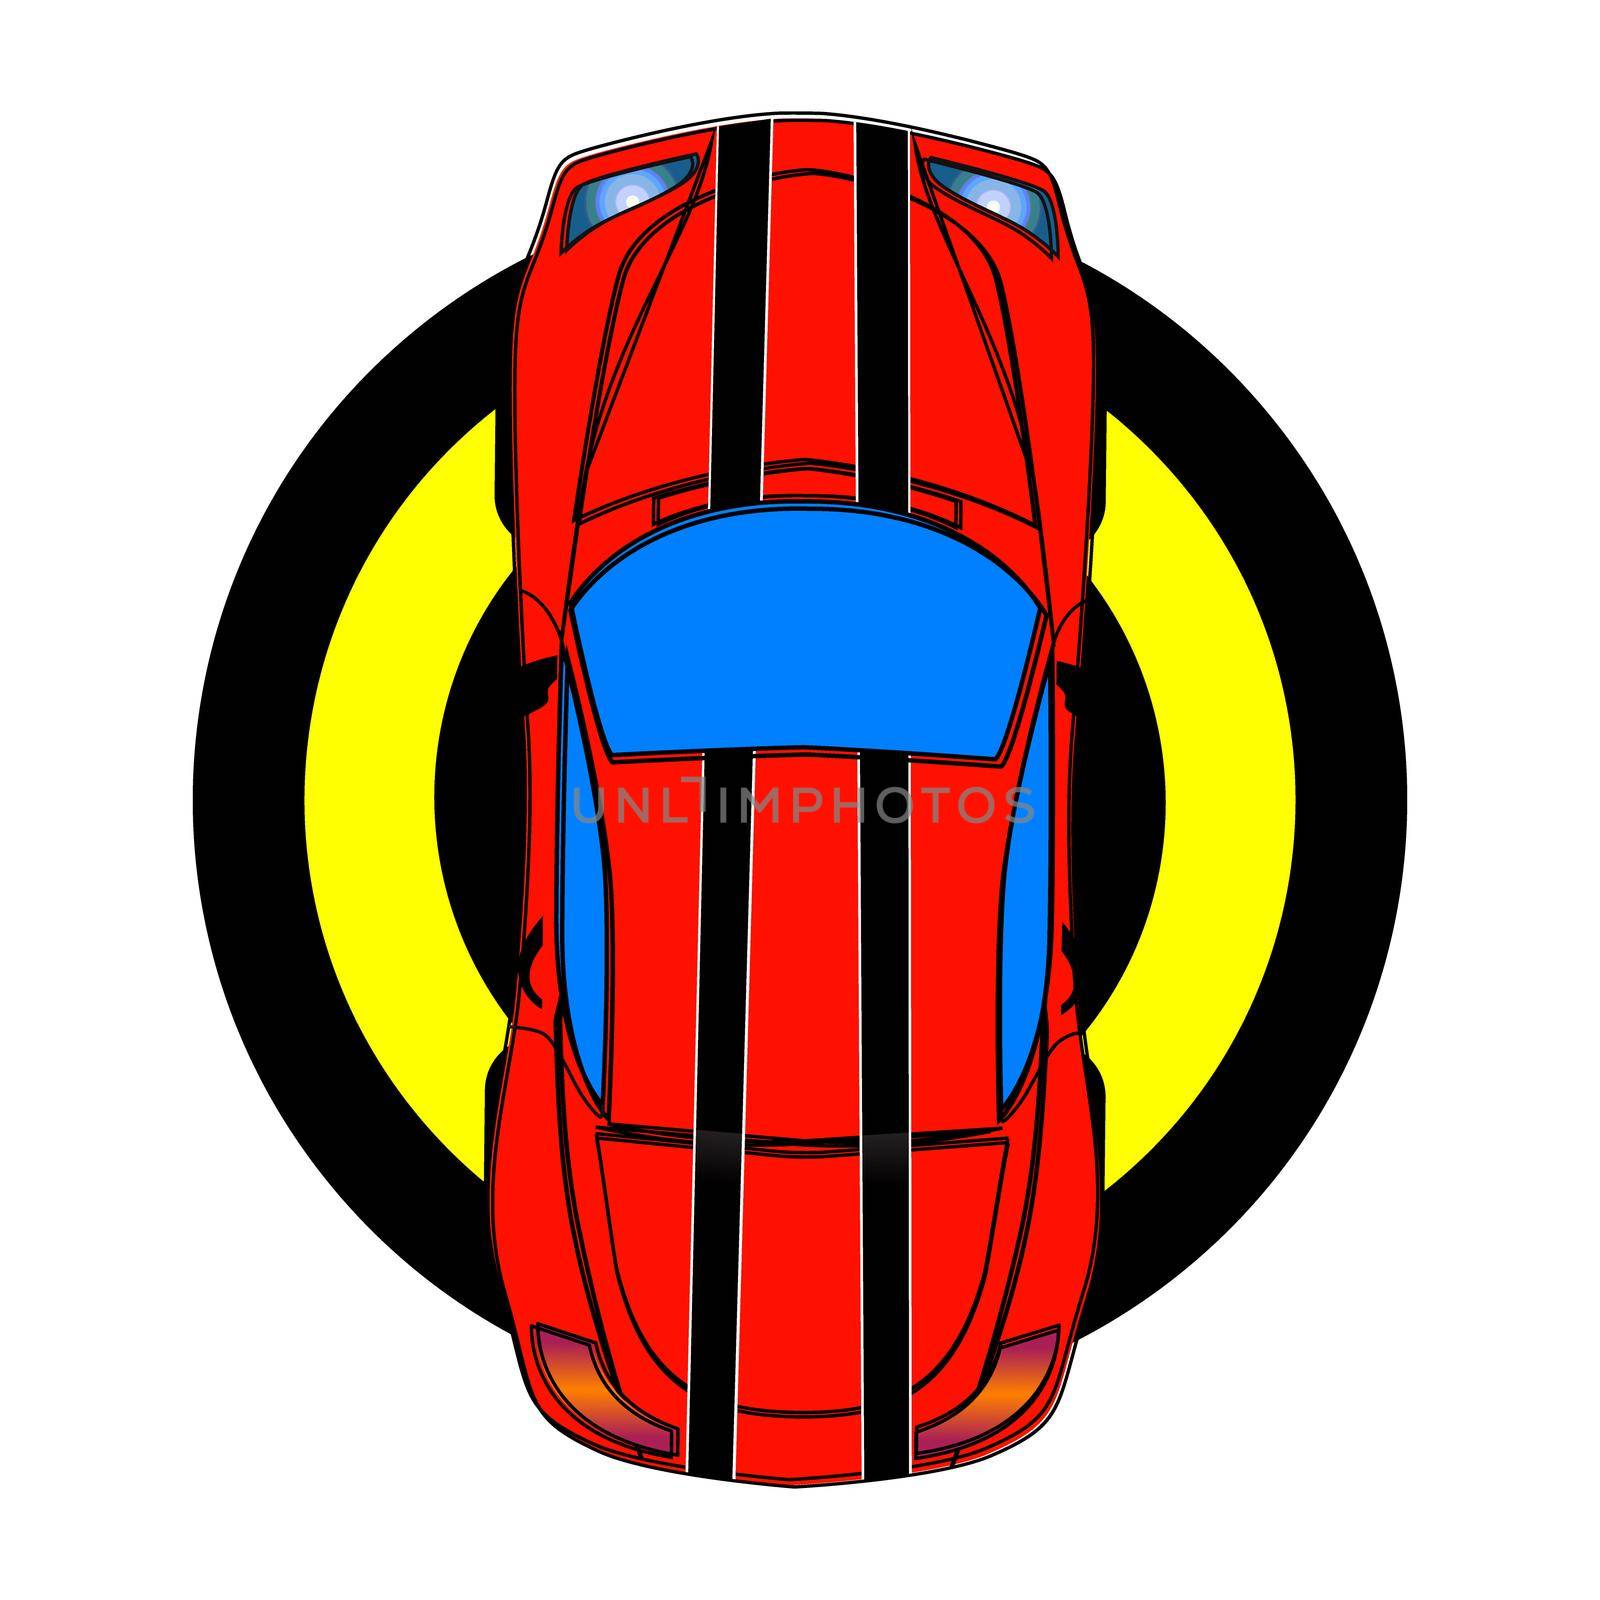 Red sport car with black stripes. Top view. Vector illustration.